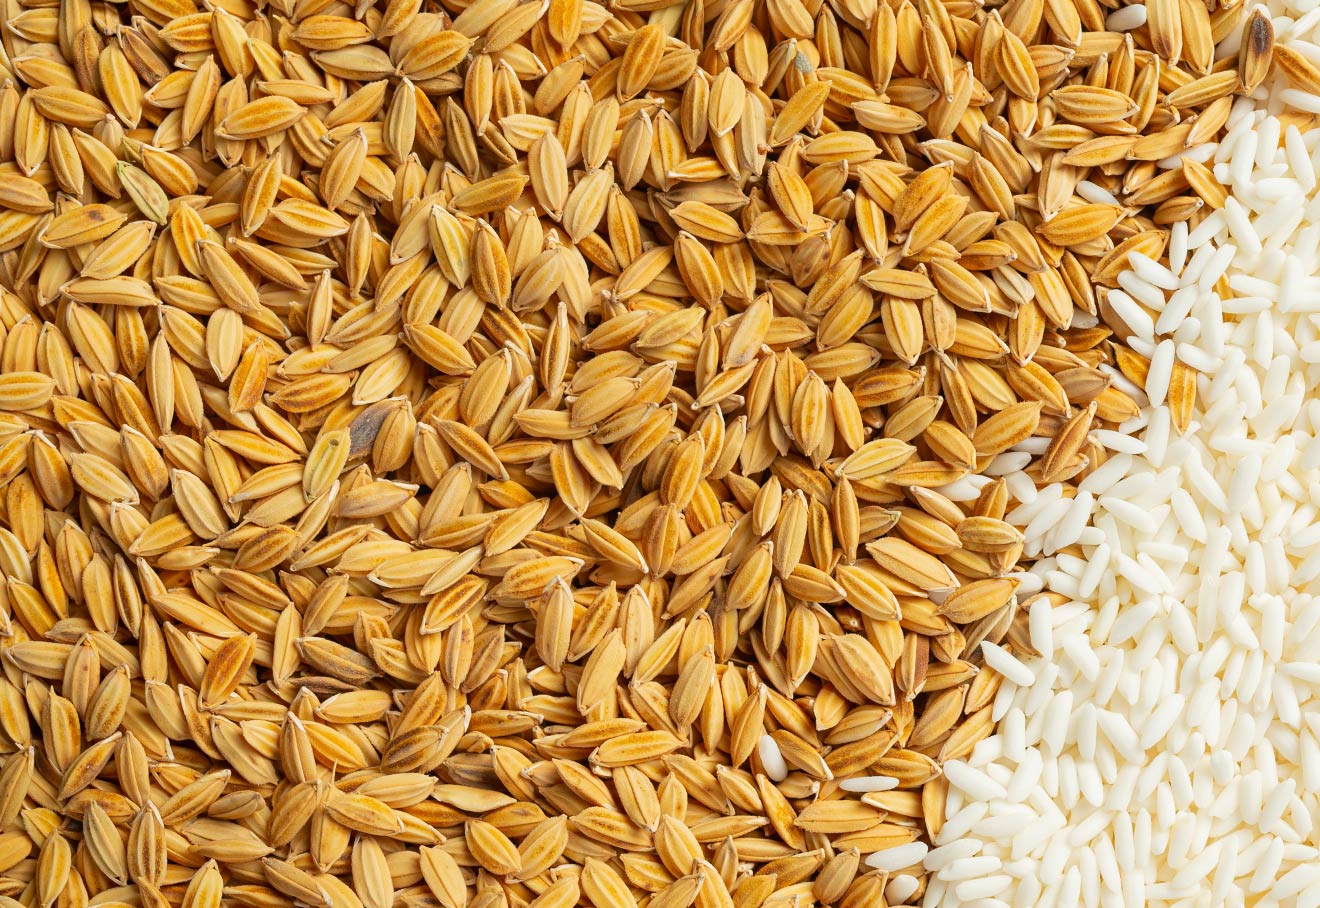 Punjab Industry Urges Govt To Consider Failed Fortified Rice Kernels As CMR